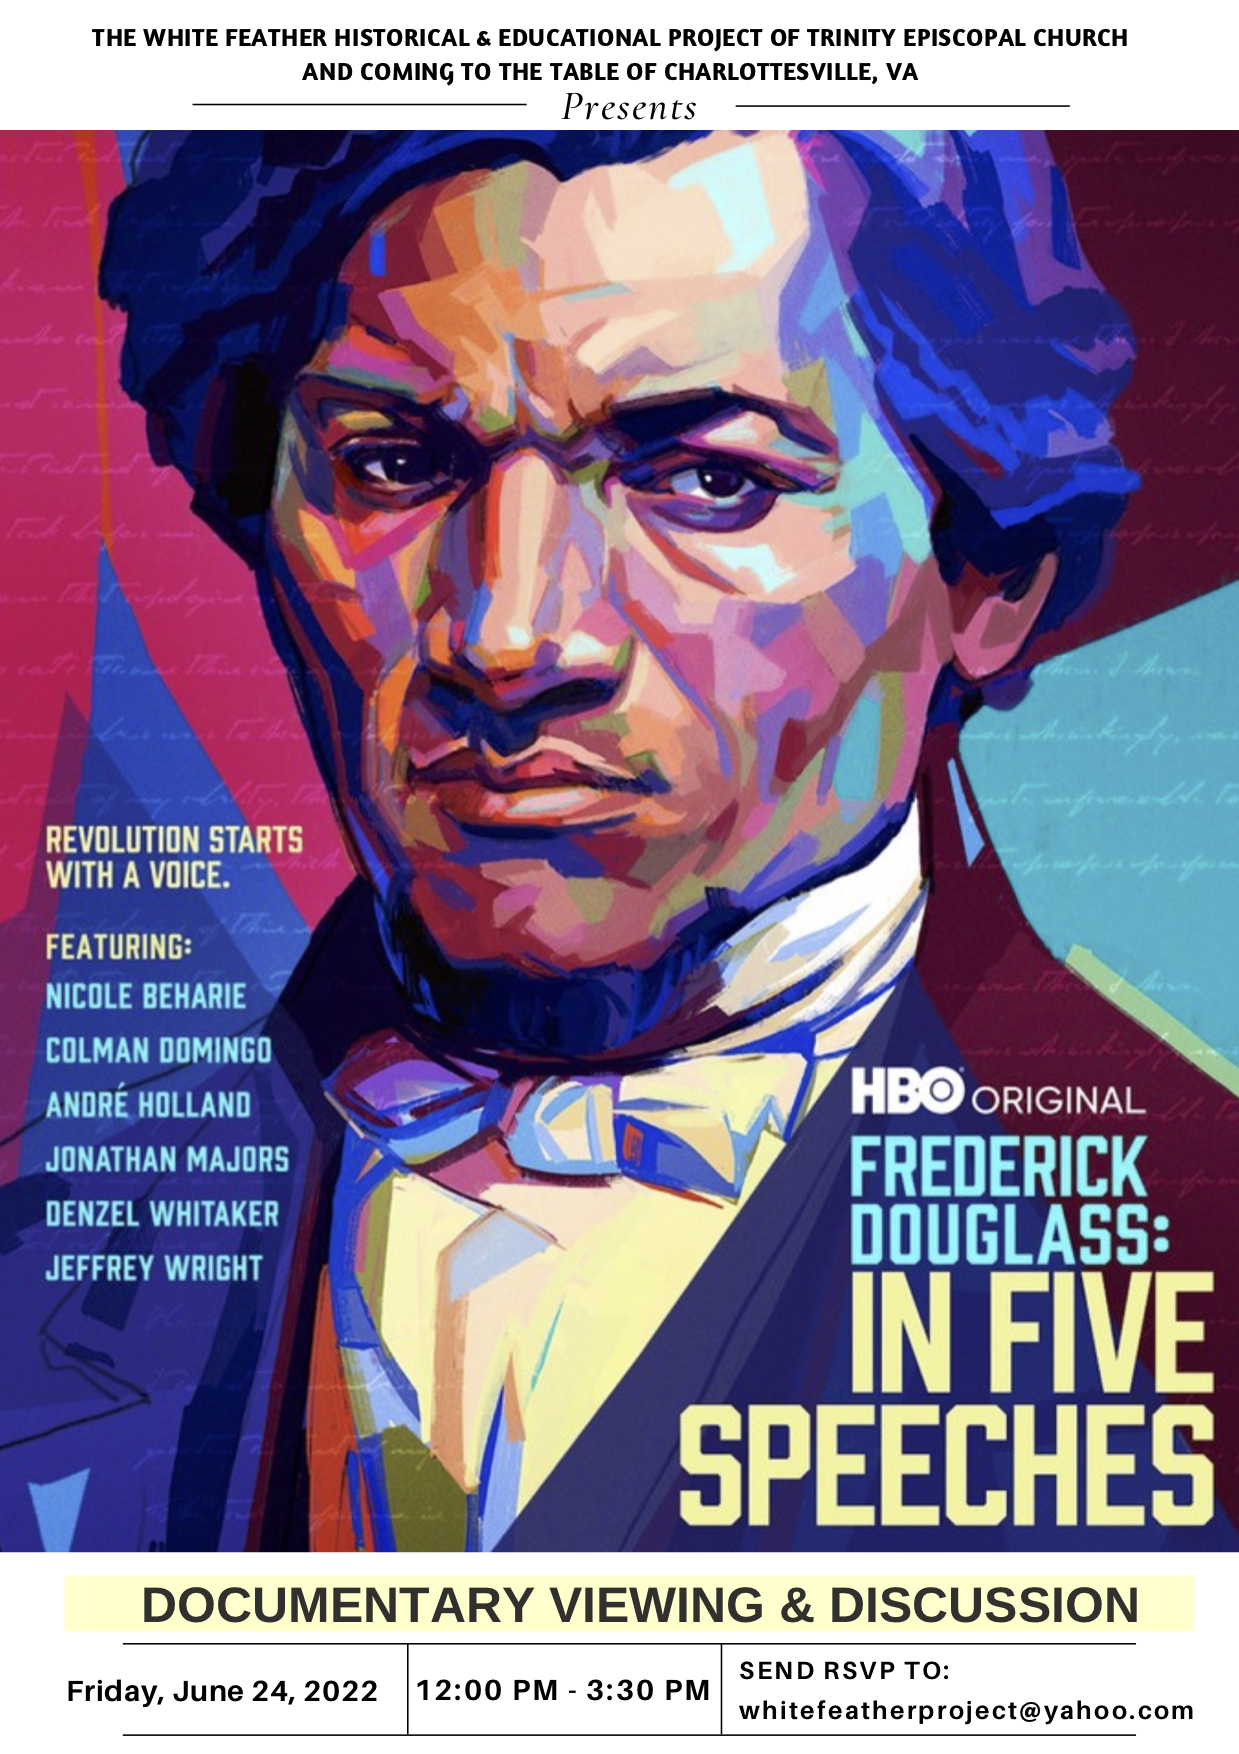 Frederick Douglas Doc Viewing & Discussion.png